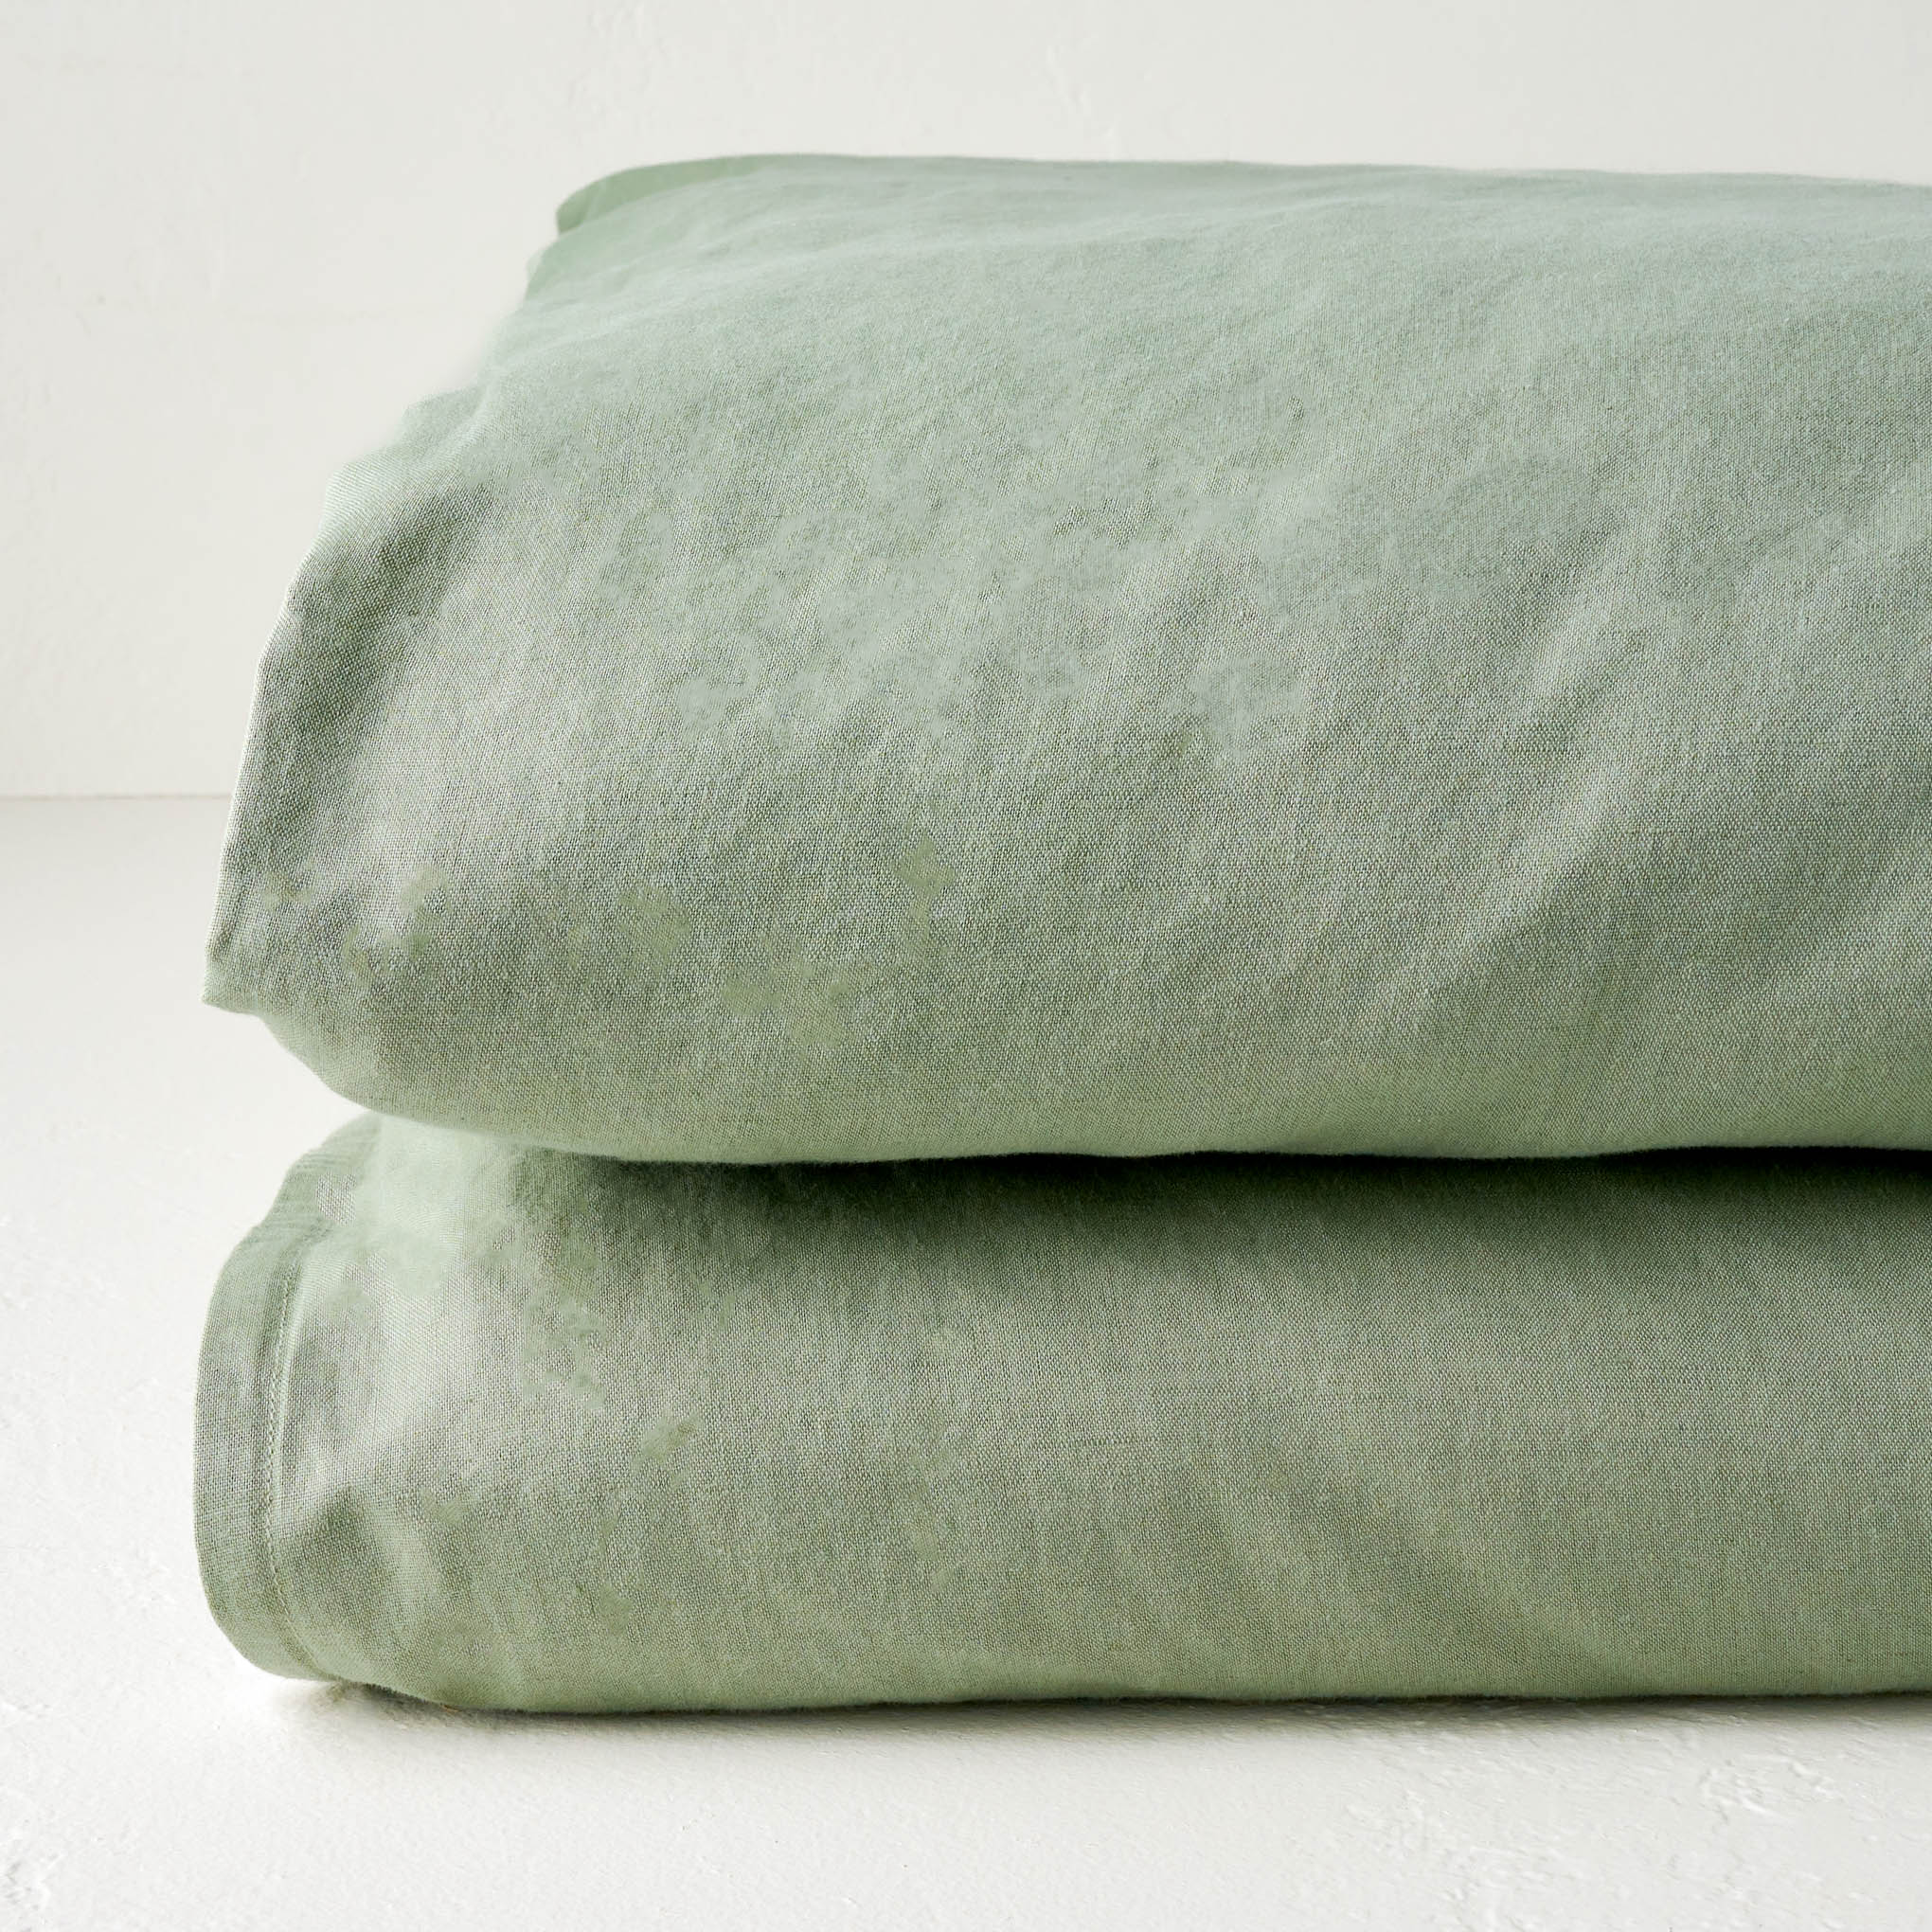 Washed Linen Cotton Duvet - Seagrass folded Items range from $159.00 to $169.00